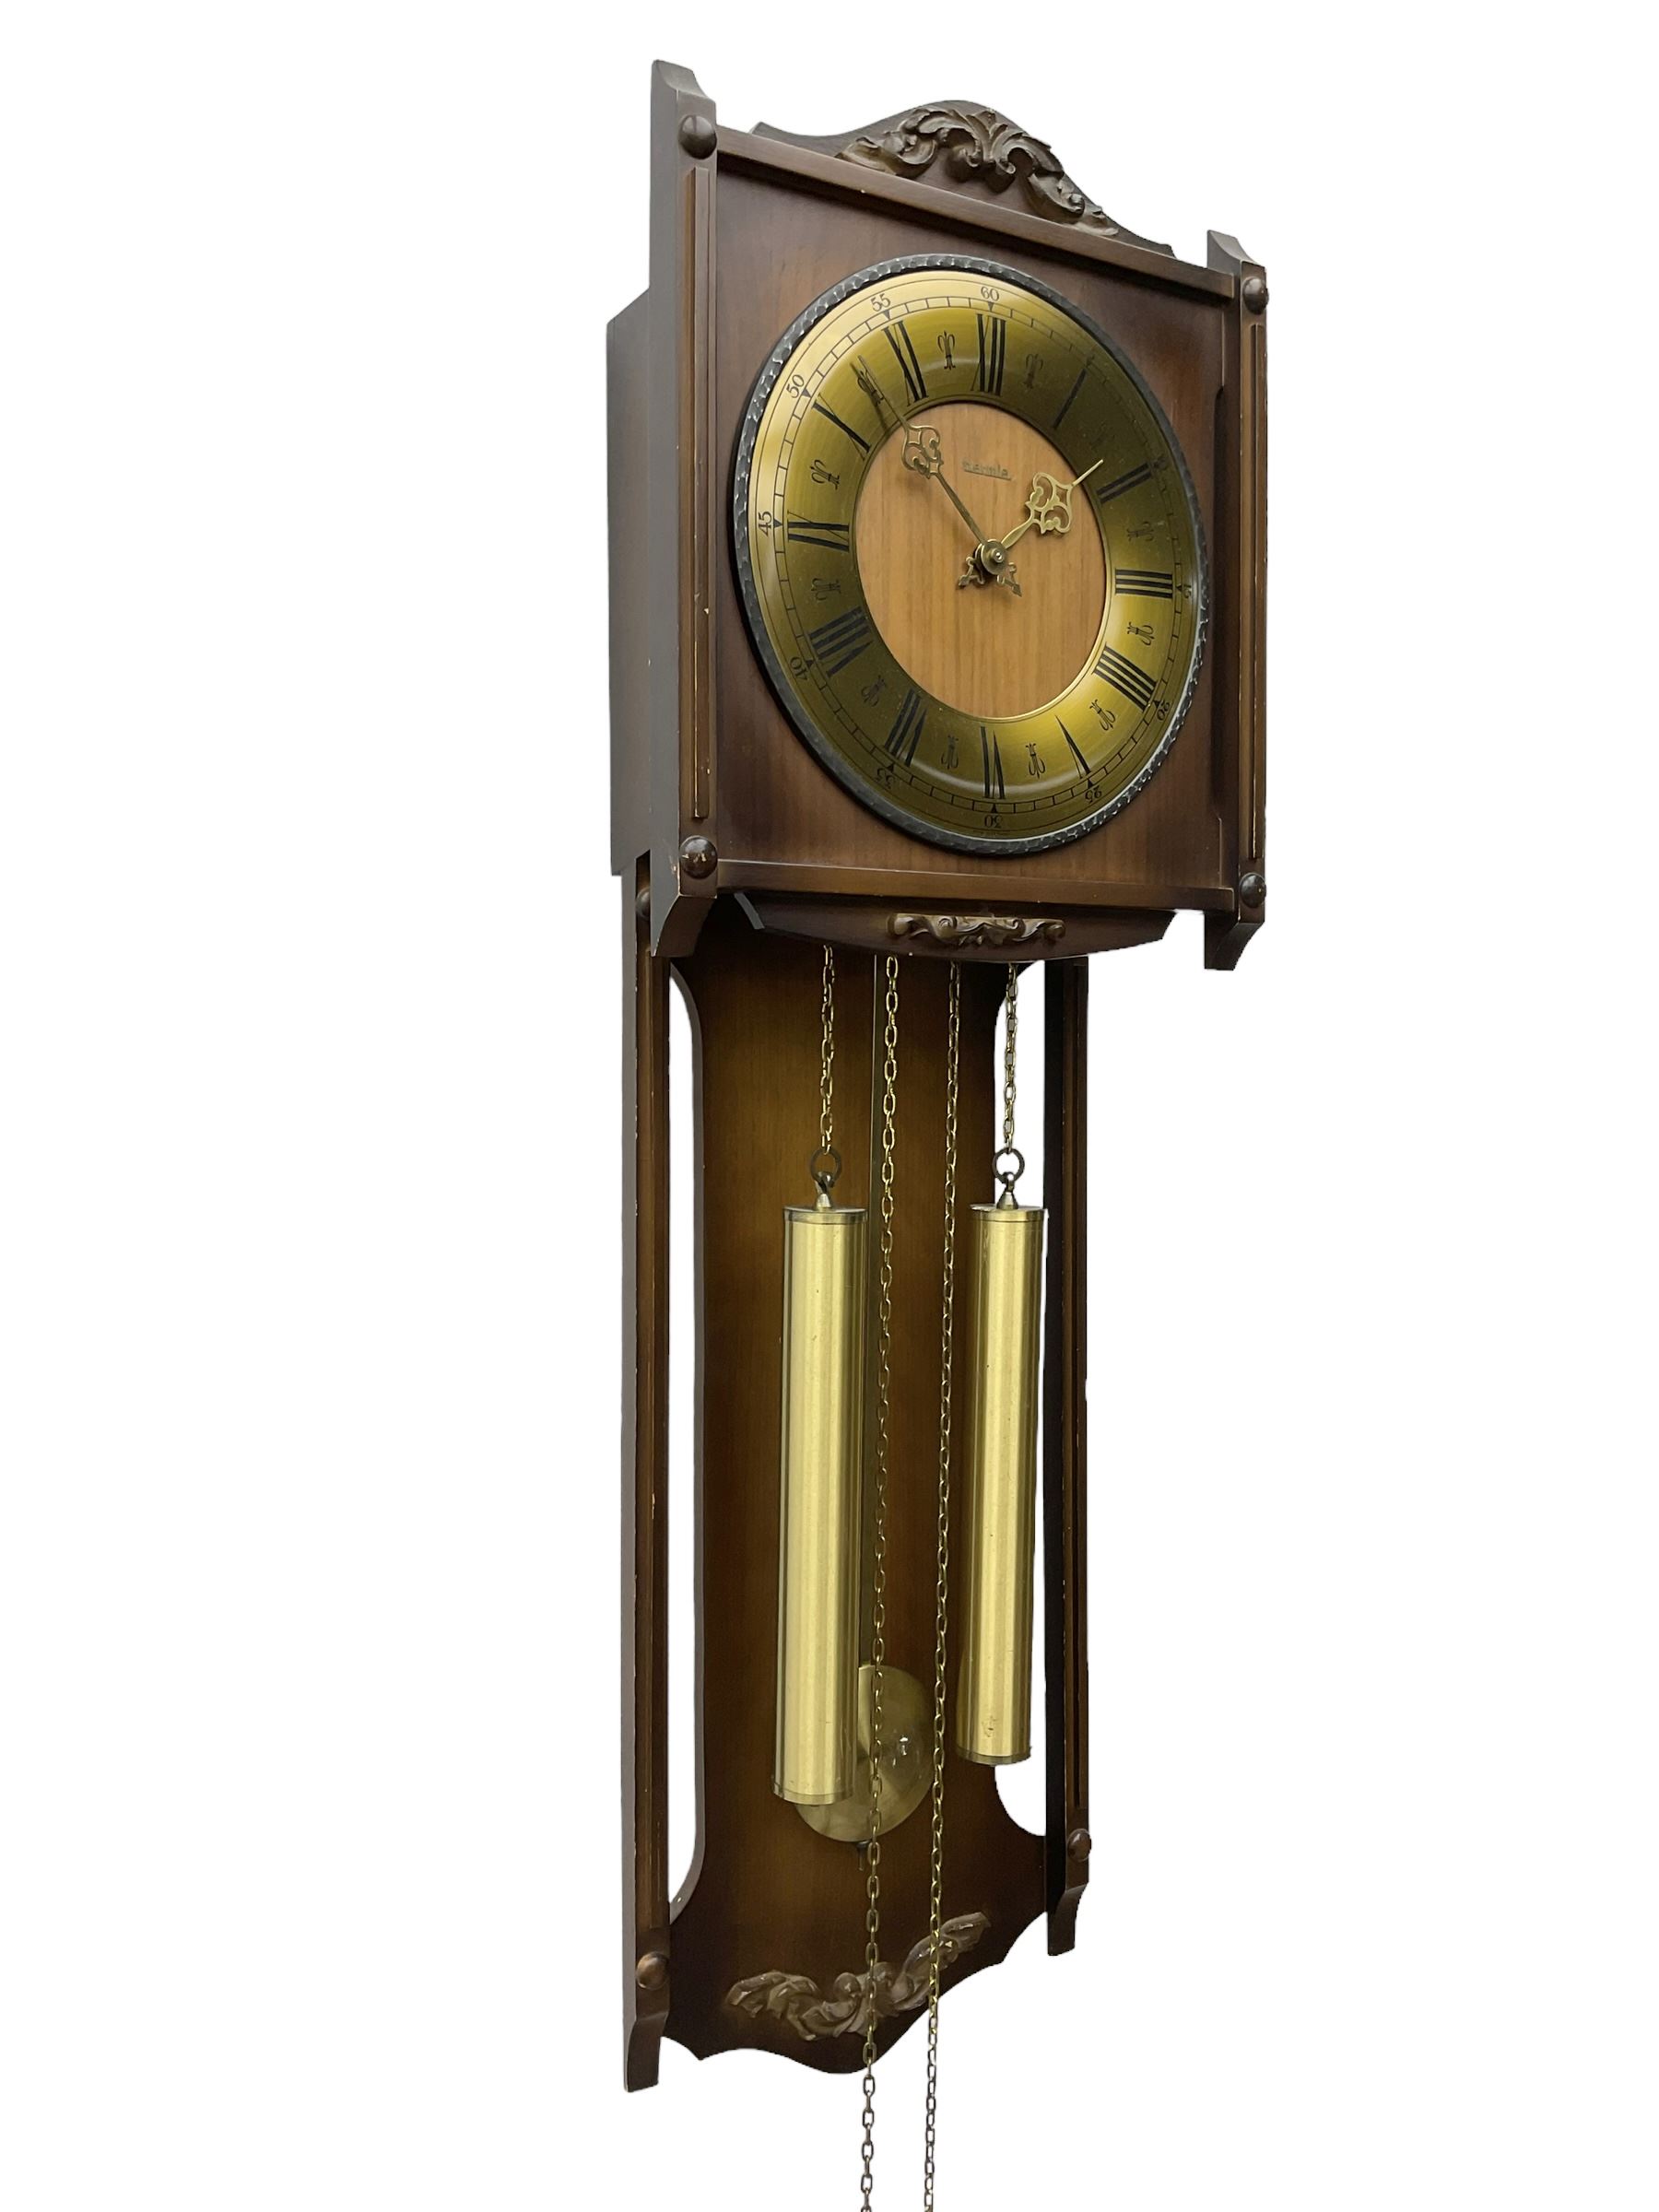 Hermle German double weight driven wall clock - Image 2 of 3